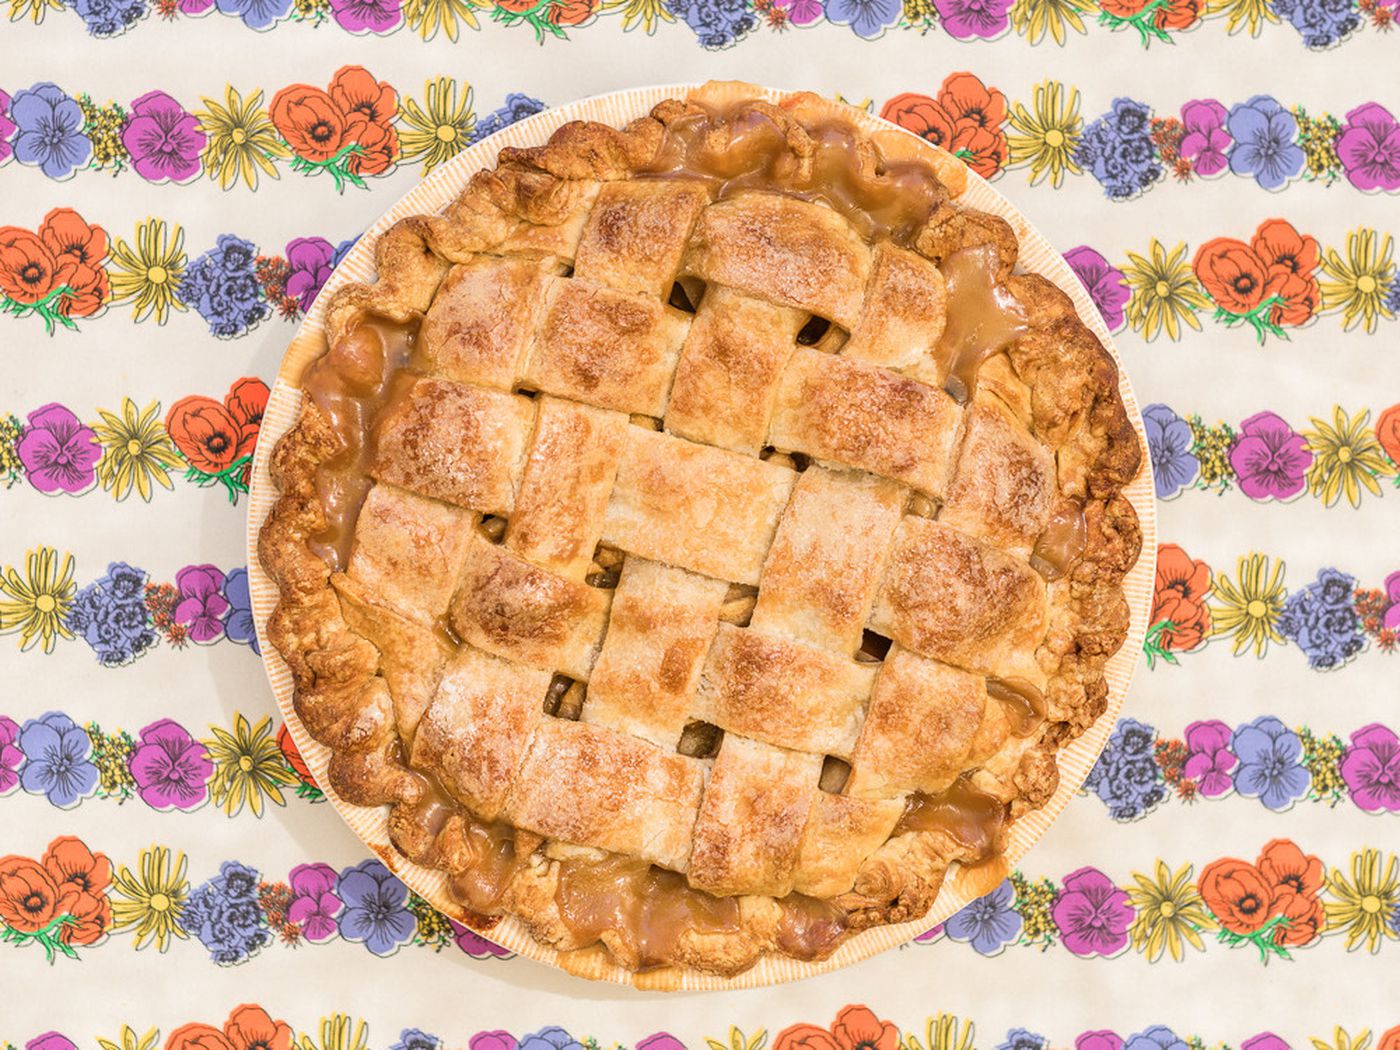 How Much Does A Pie Cost? - The Trellis